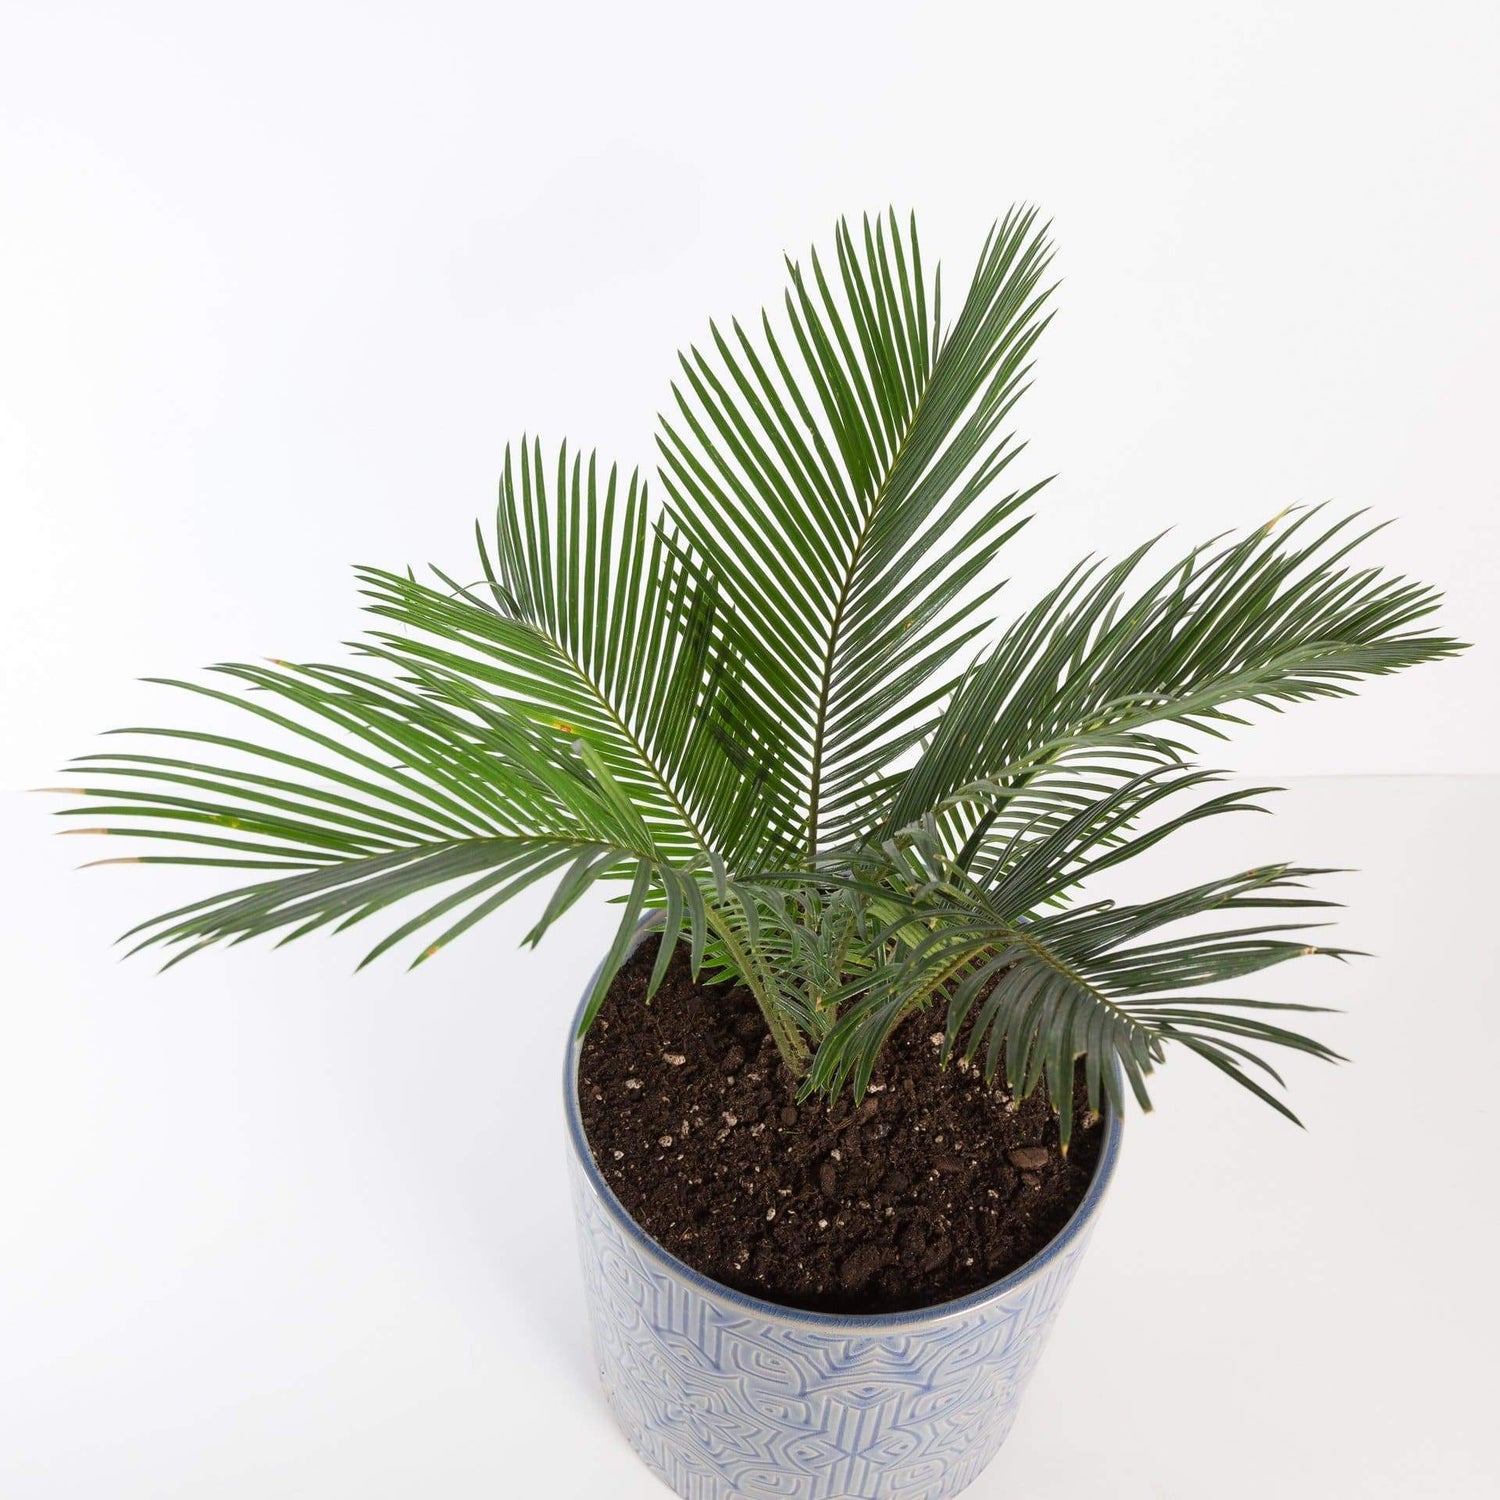 Urban Sprouts Plant 8" in nursery pot Palm 'Sago'